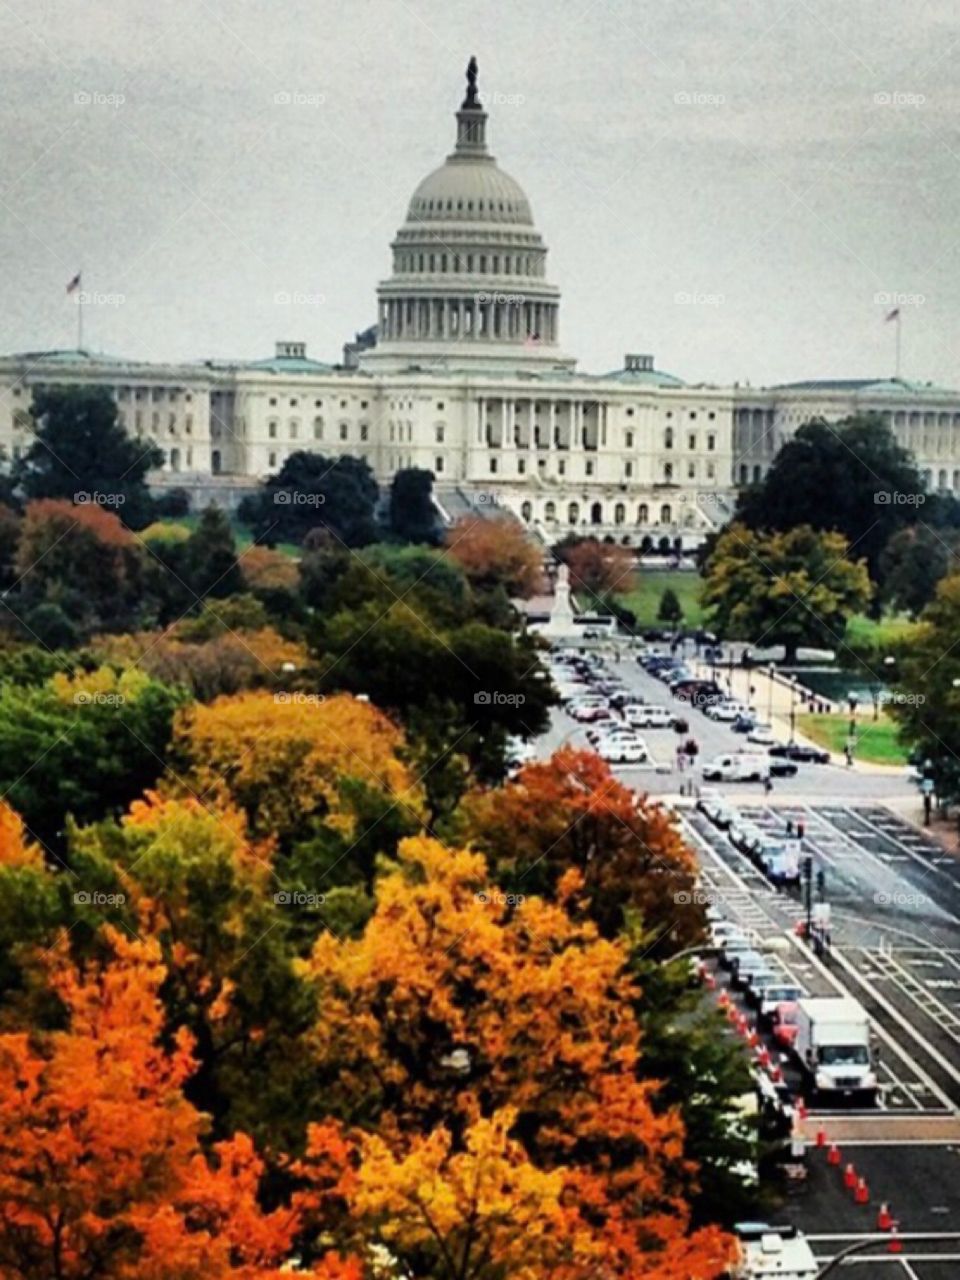 Fall in D.C. 
View from Newseum